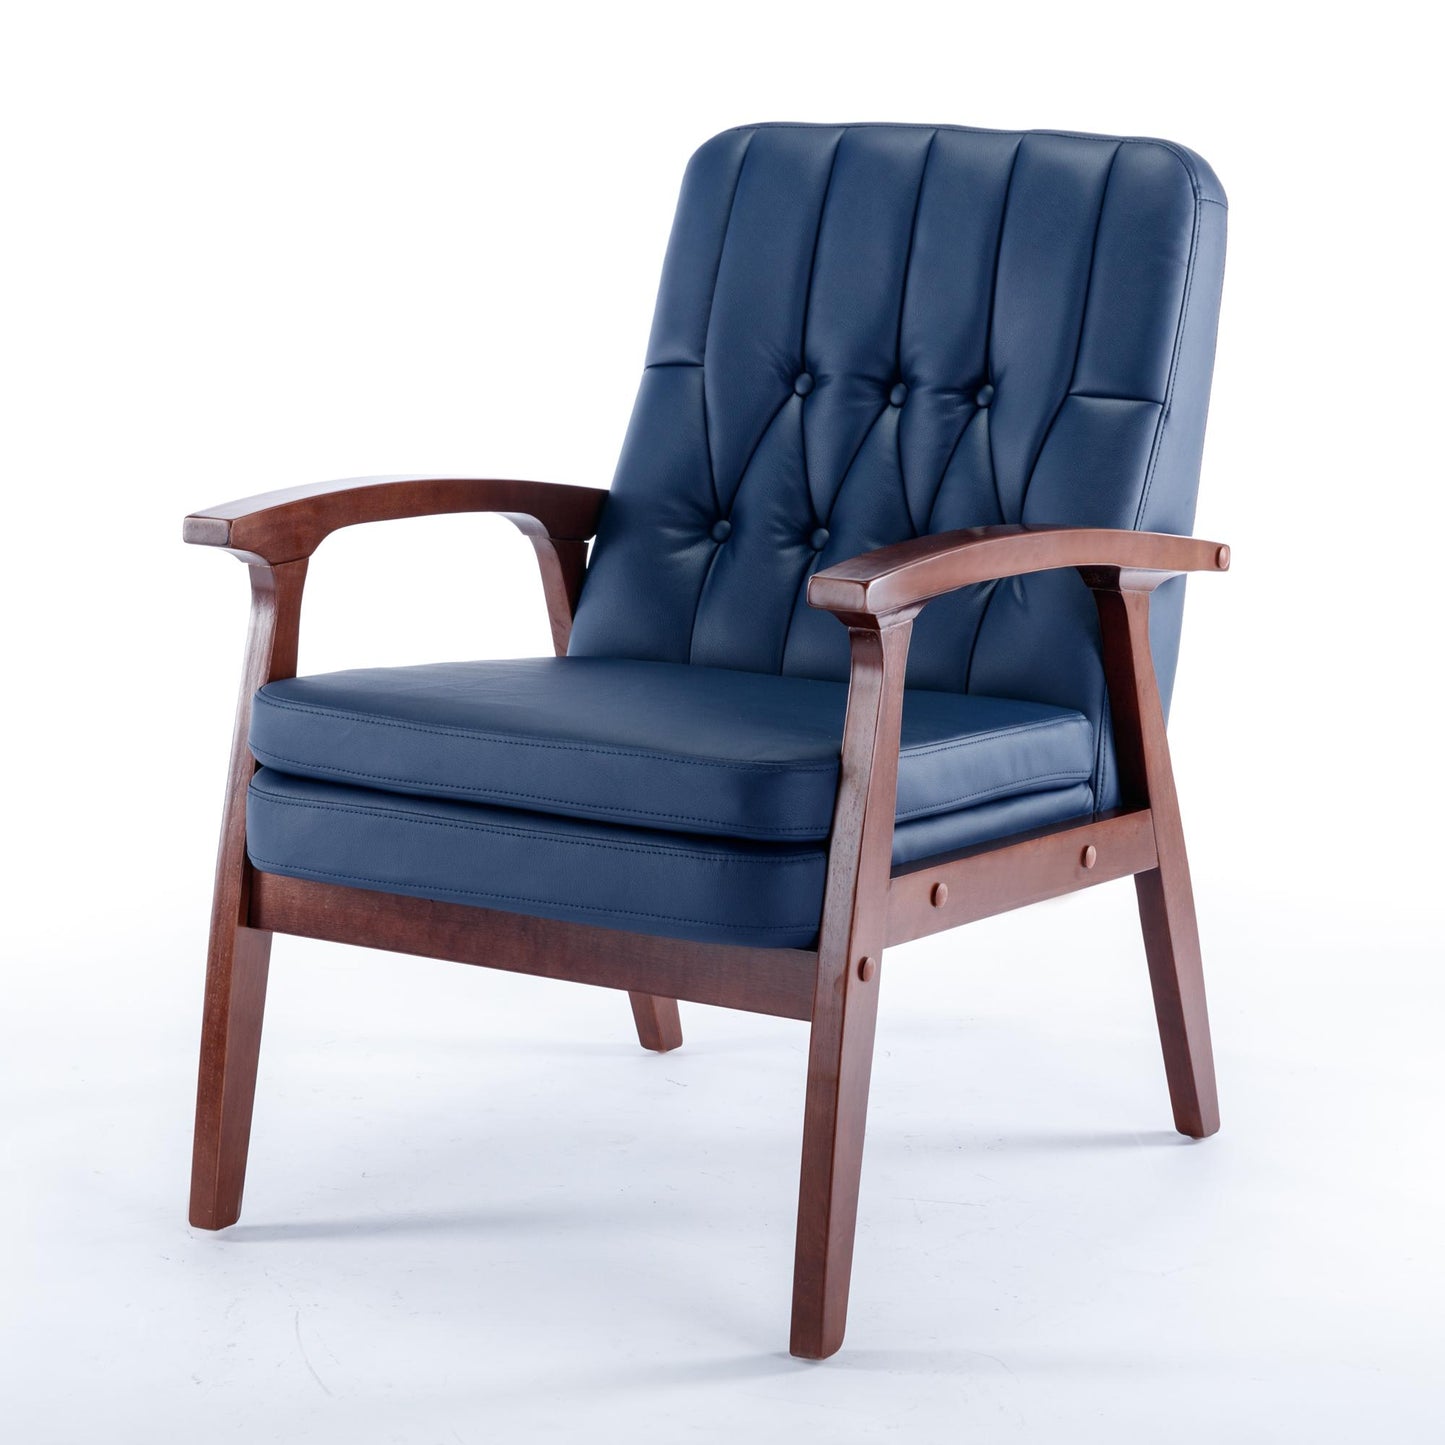 RetroVibe Accent Chair